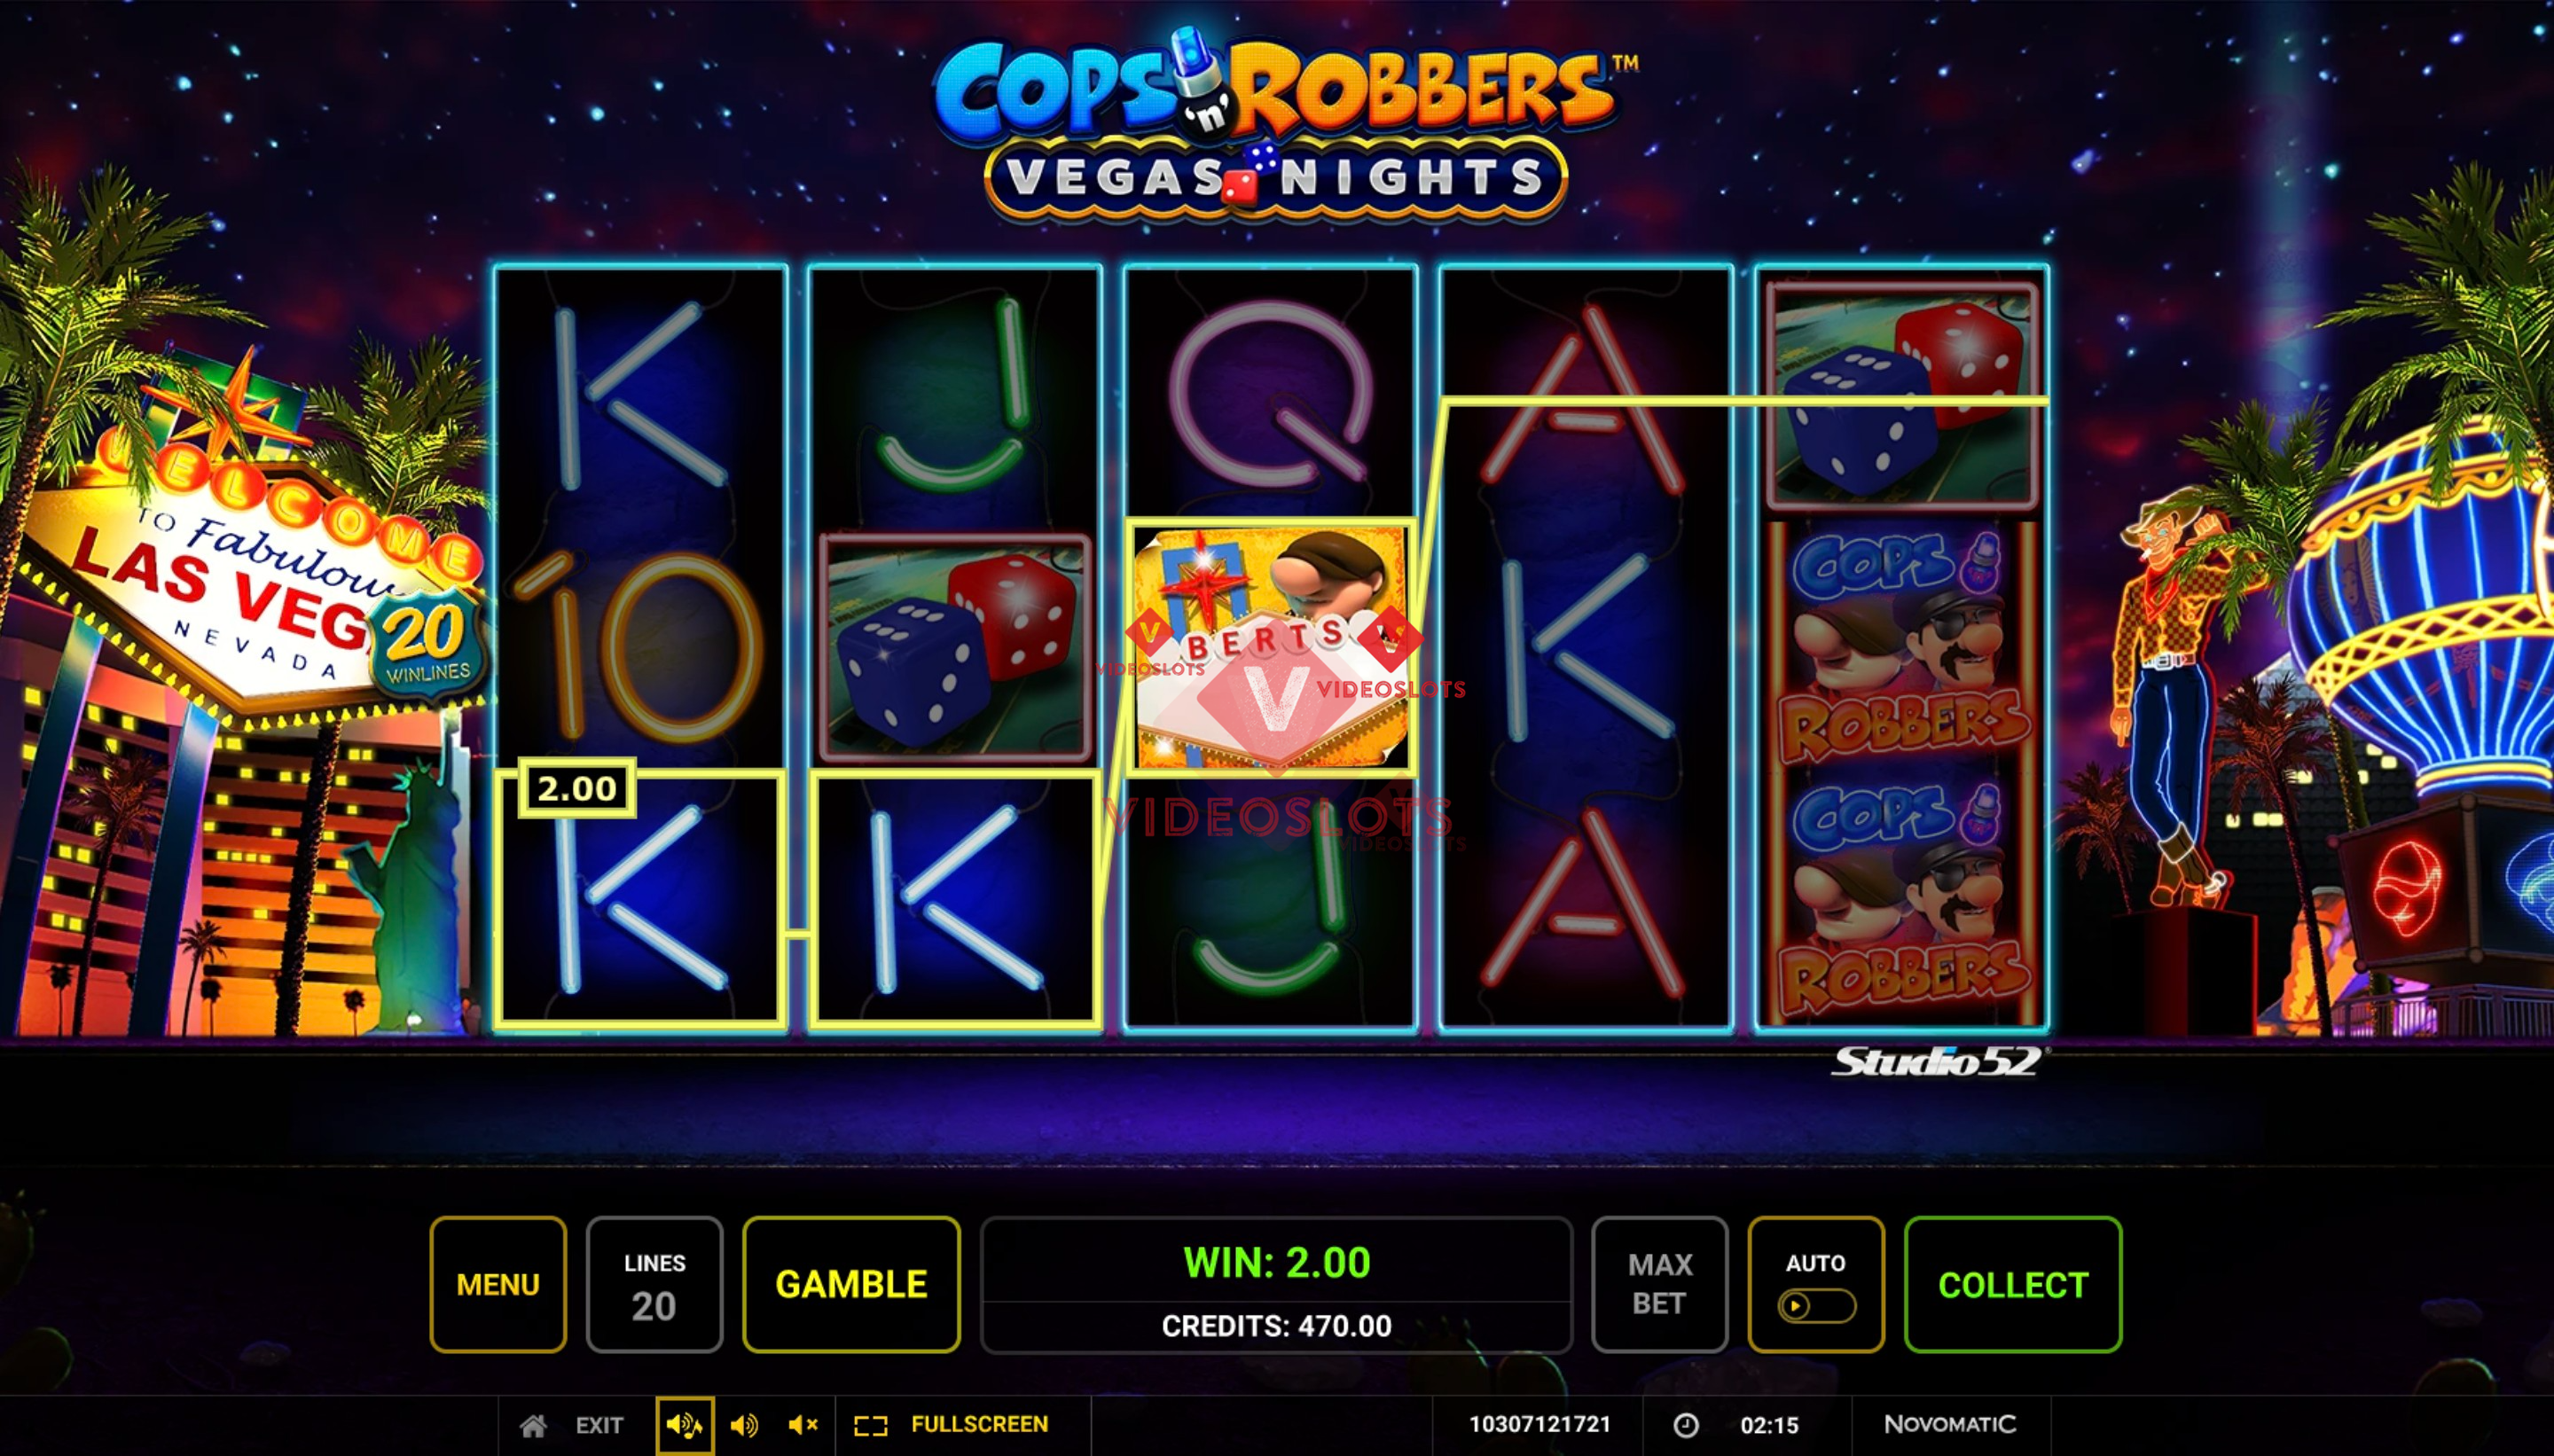 Base Game for Cops 'n' Robbers Vegas Nights slot from Greentube